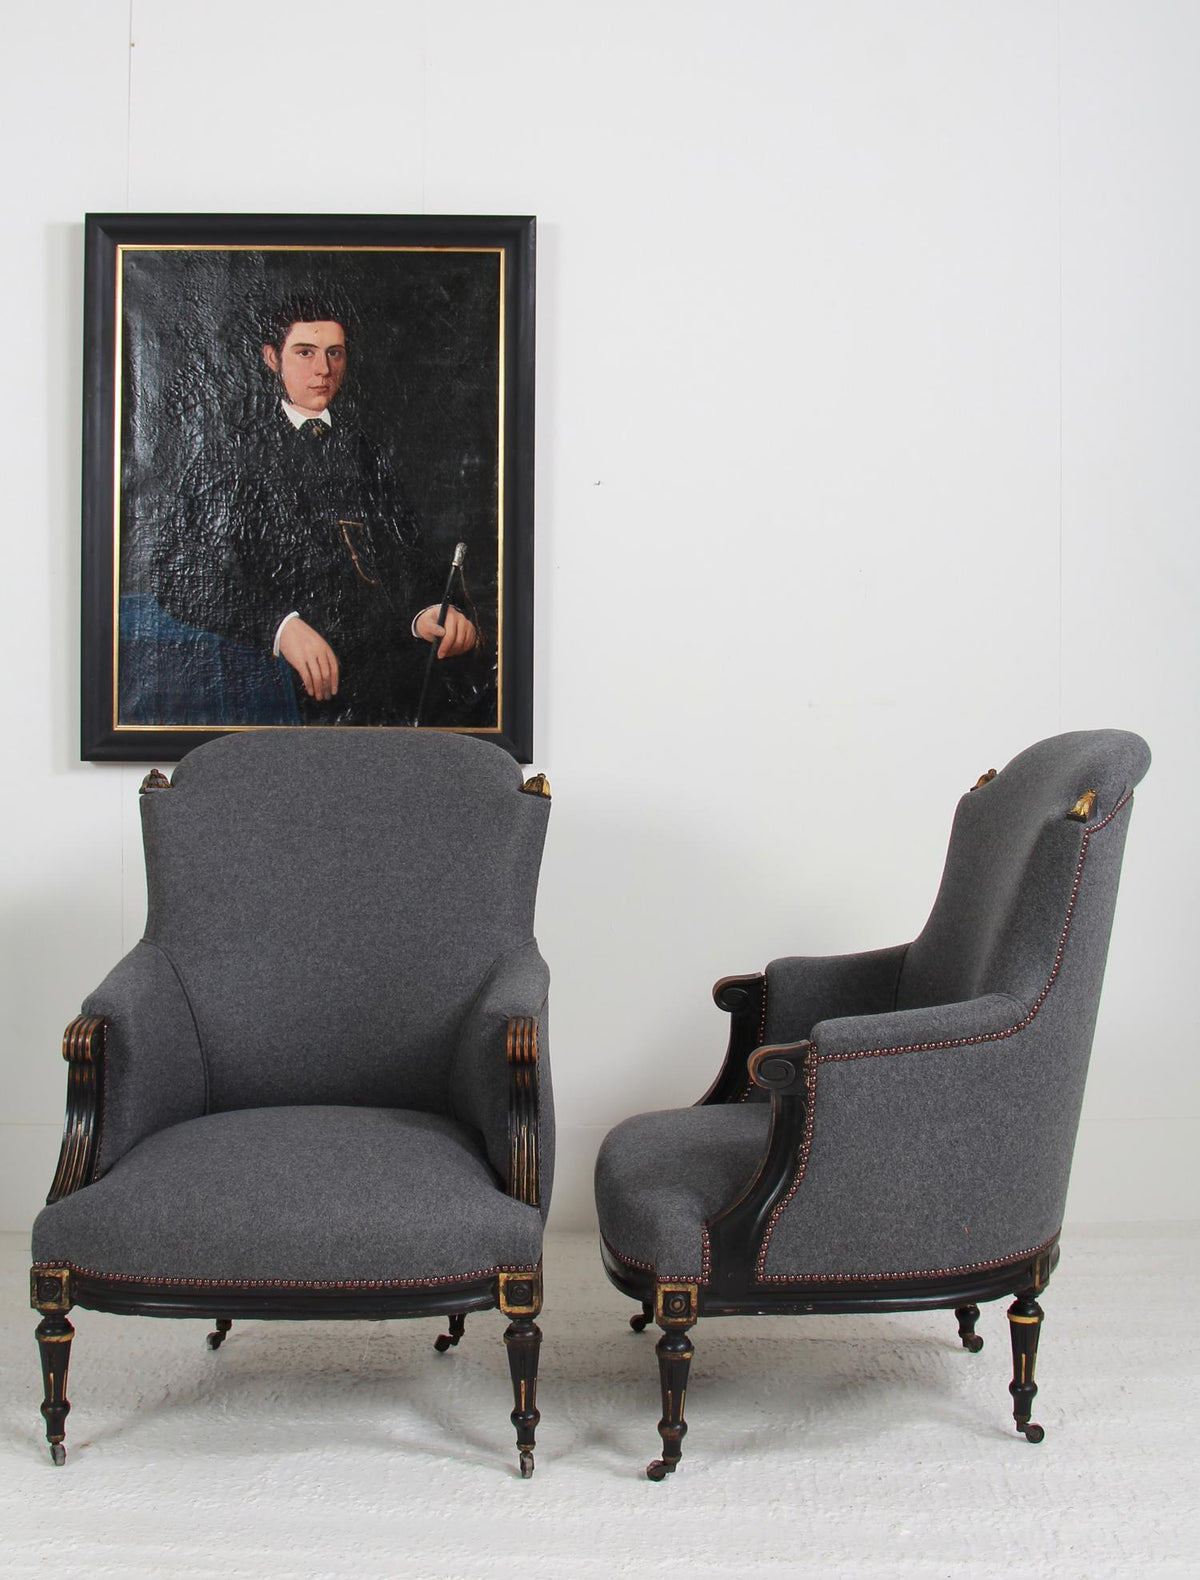 Pair of French 19thC Fauteuils in Grey Wool Fabric